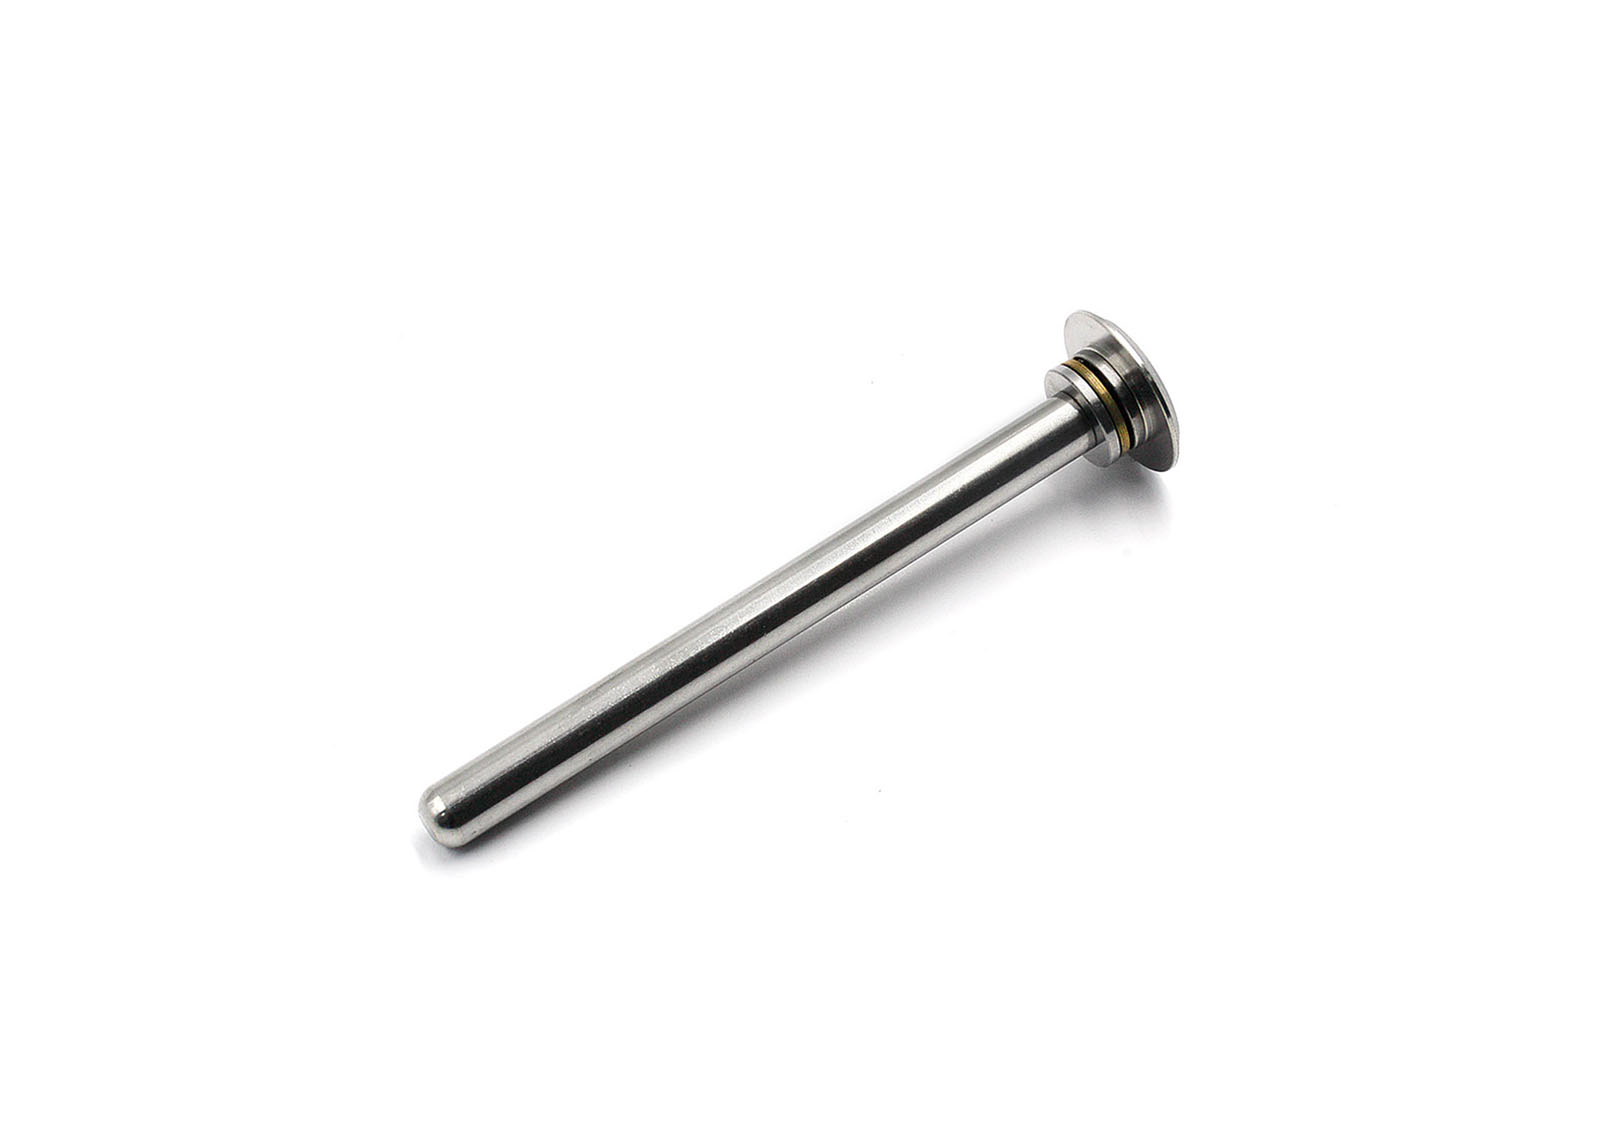 Stainless Spring Guide w/ Bearing for APS-2 series (7mm) - Modify Bolt Action Rifle Parts